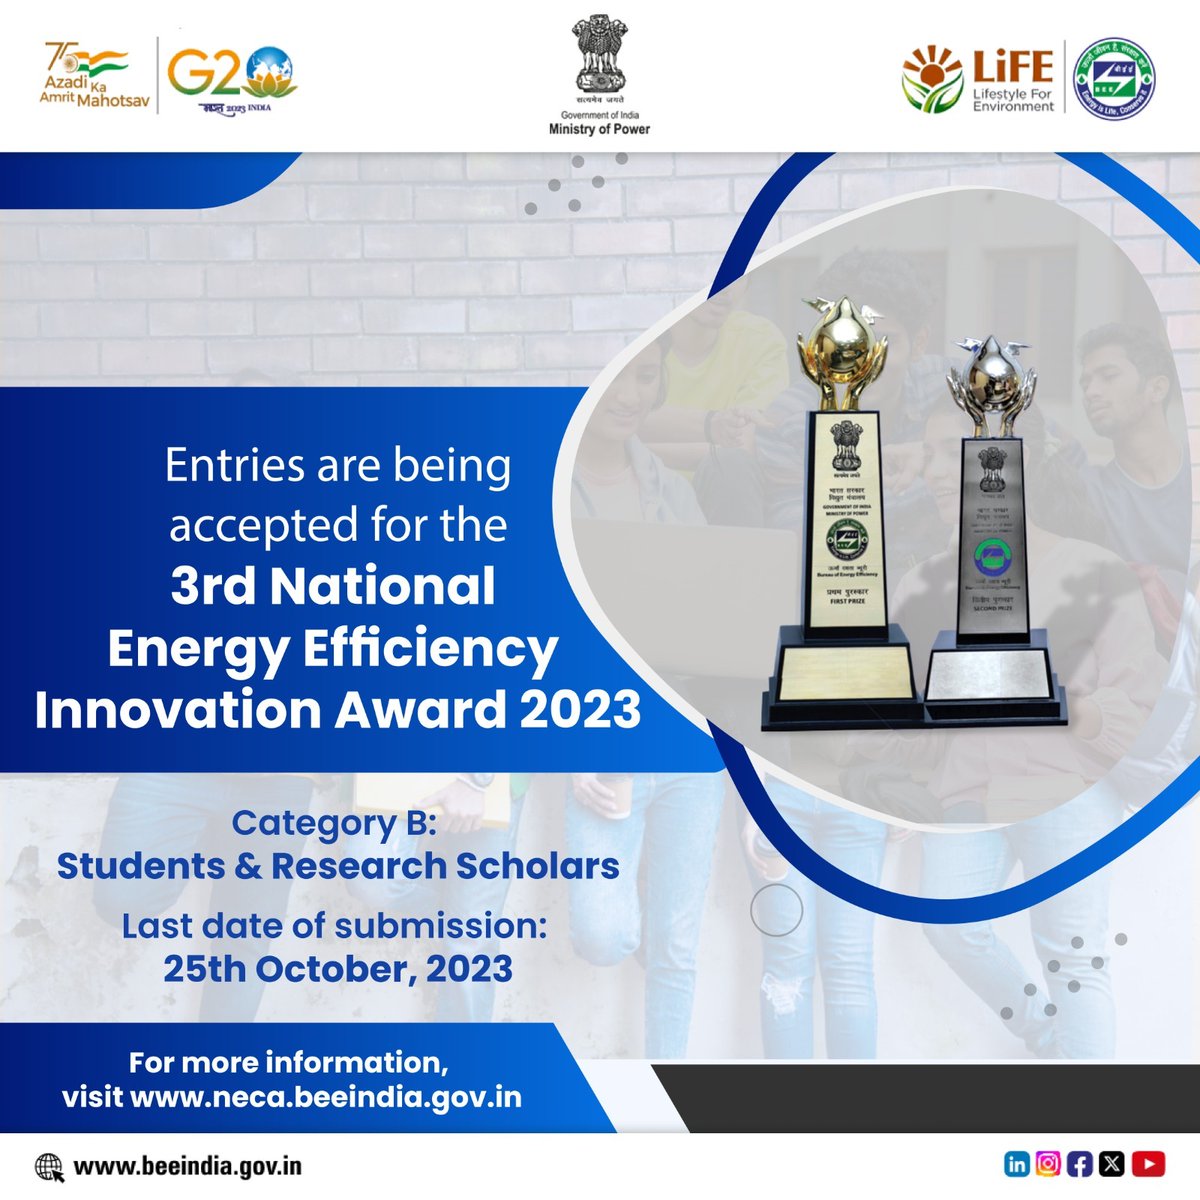 BEE presents the 3rd National Energy Efficiency Innovation Award 2023. Entries are invited for innovation in energy efficiency by students and scholars. To know more visit: neca.beeindia.gov.in
#NECA2023 #Sustainabledevelopment #GreenIndia
#energytransistion  #NEEIA